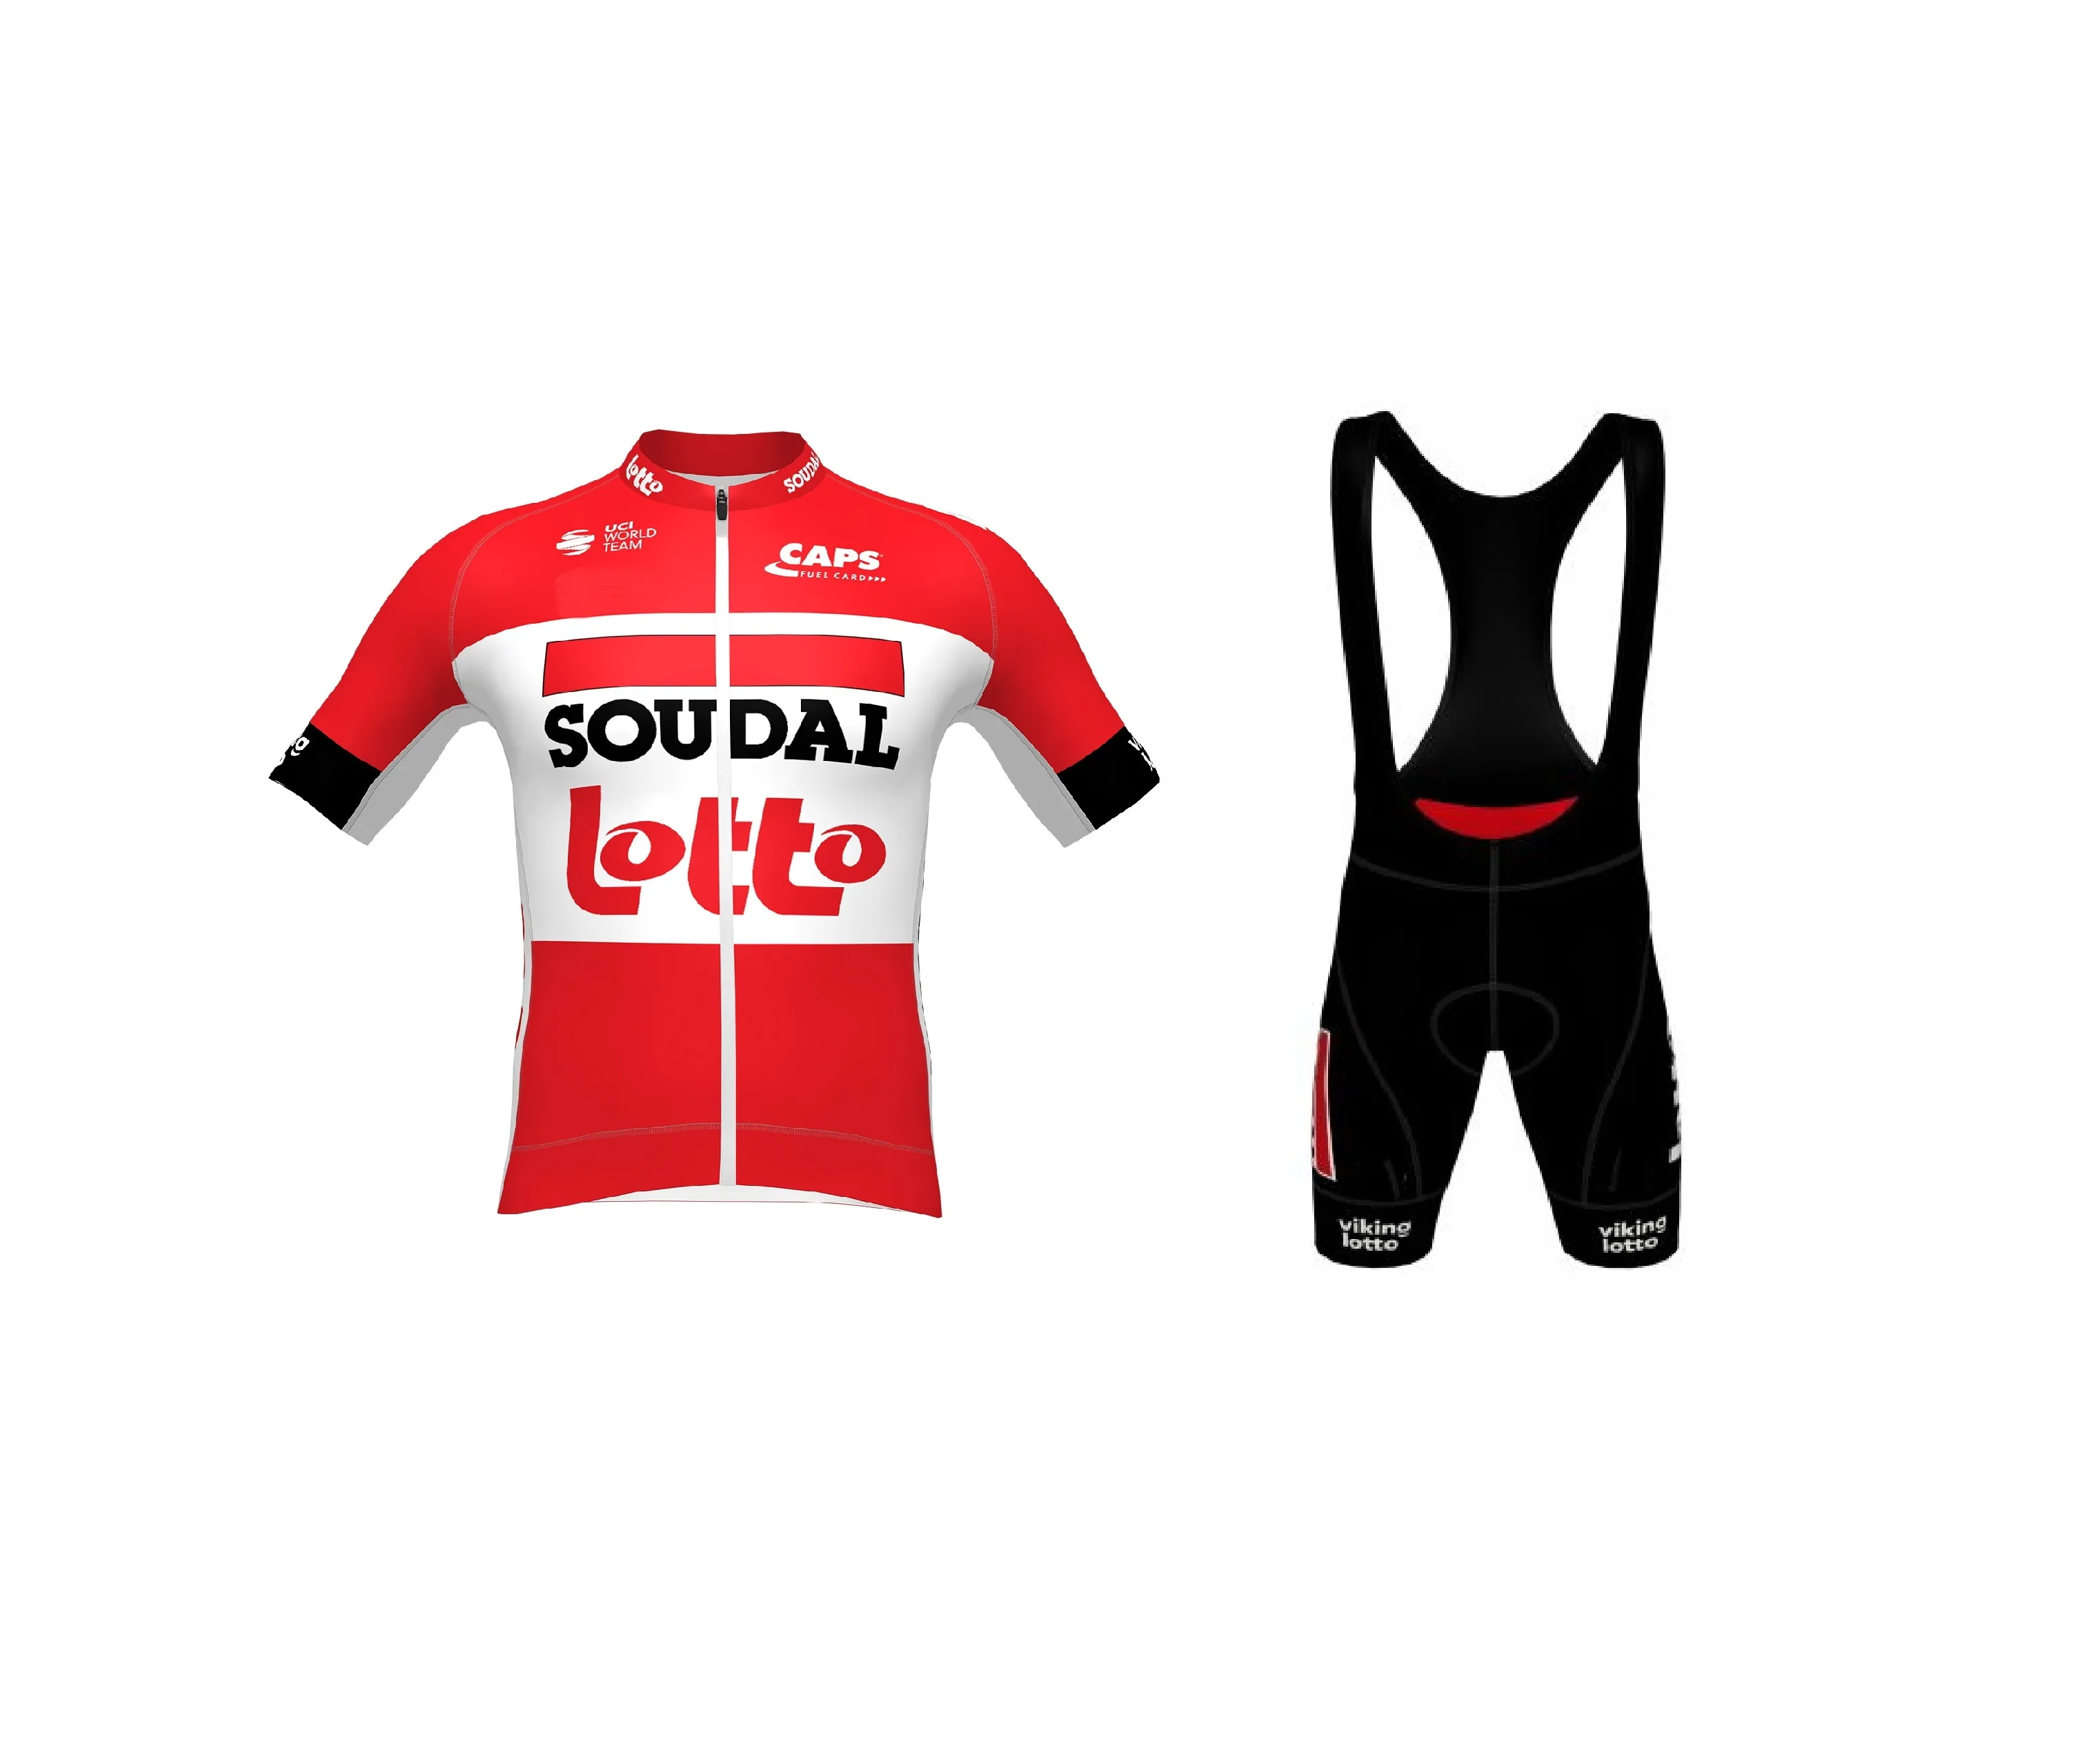 

2022 LOTTO SOUDAL TEAM SHORT SLEEVE CYCLING JERSEY SUMMER CYCLING WEAR ROPA CICLISMO+BIB SHORTS WITH POWER BAND